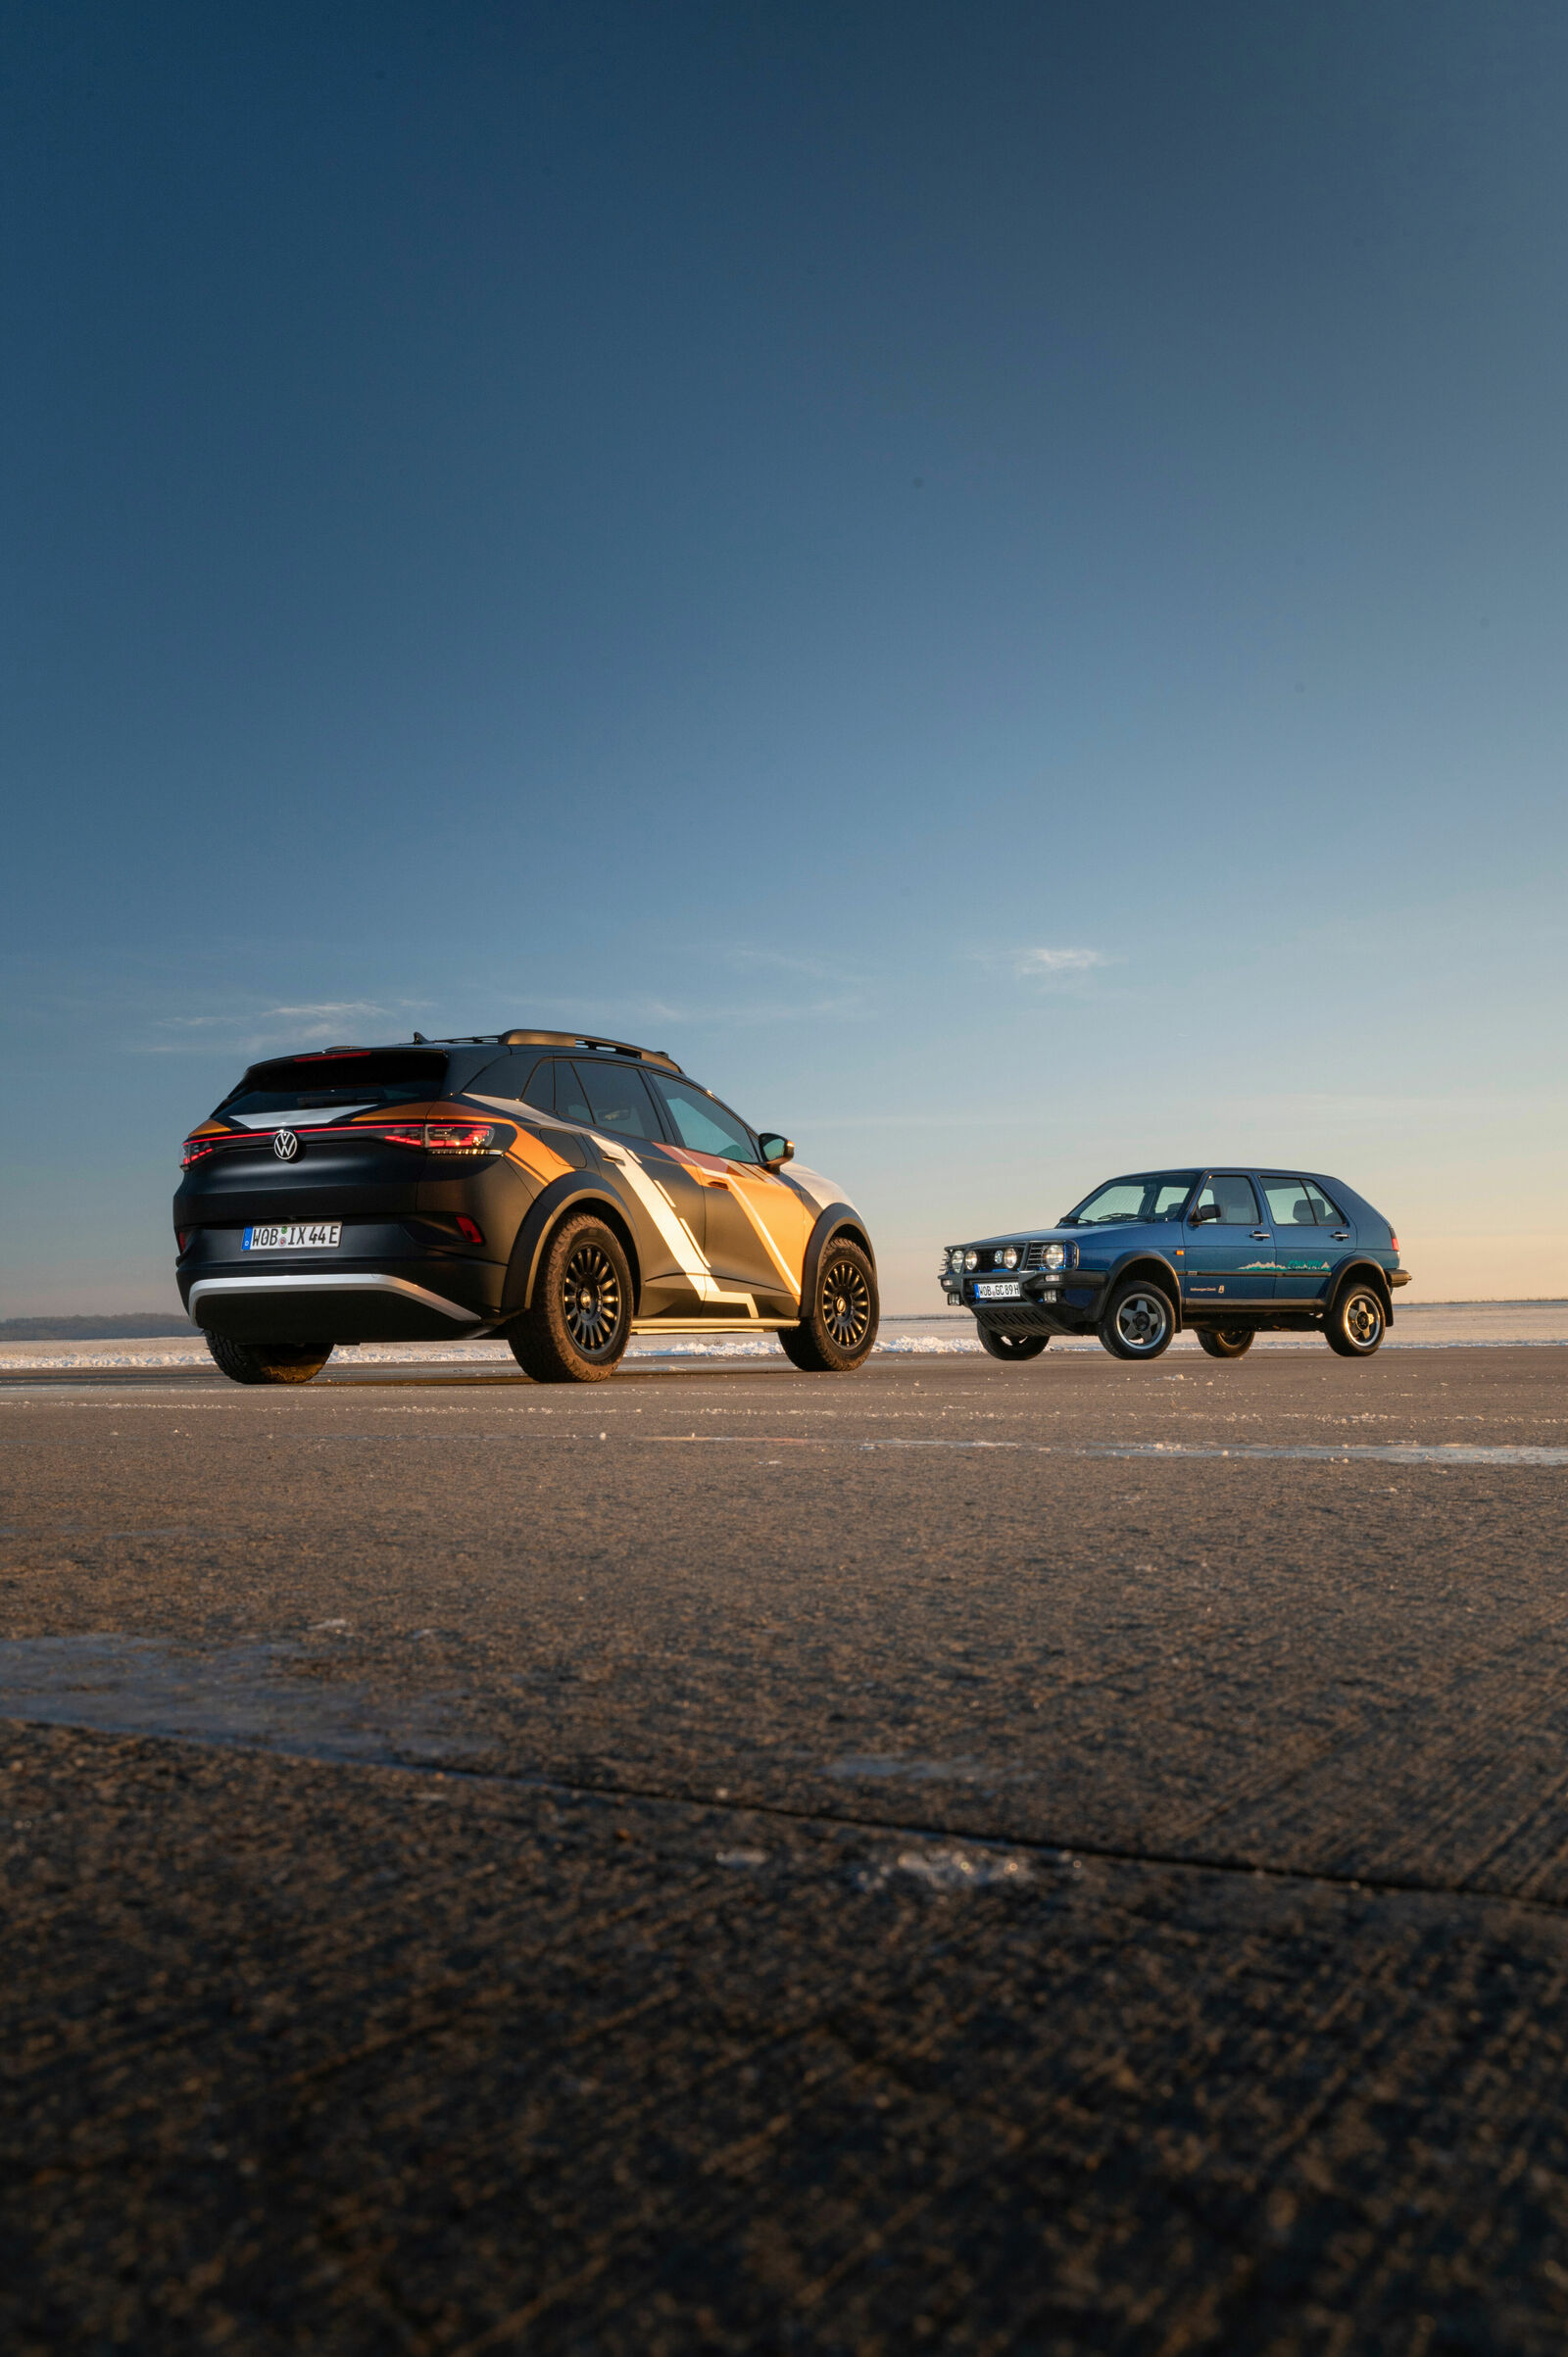 Volkswagen ID. XTREME off-road concept car and Golf II Country